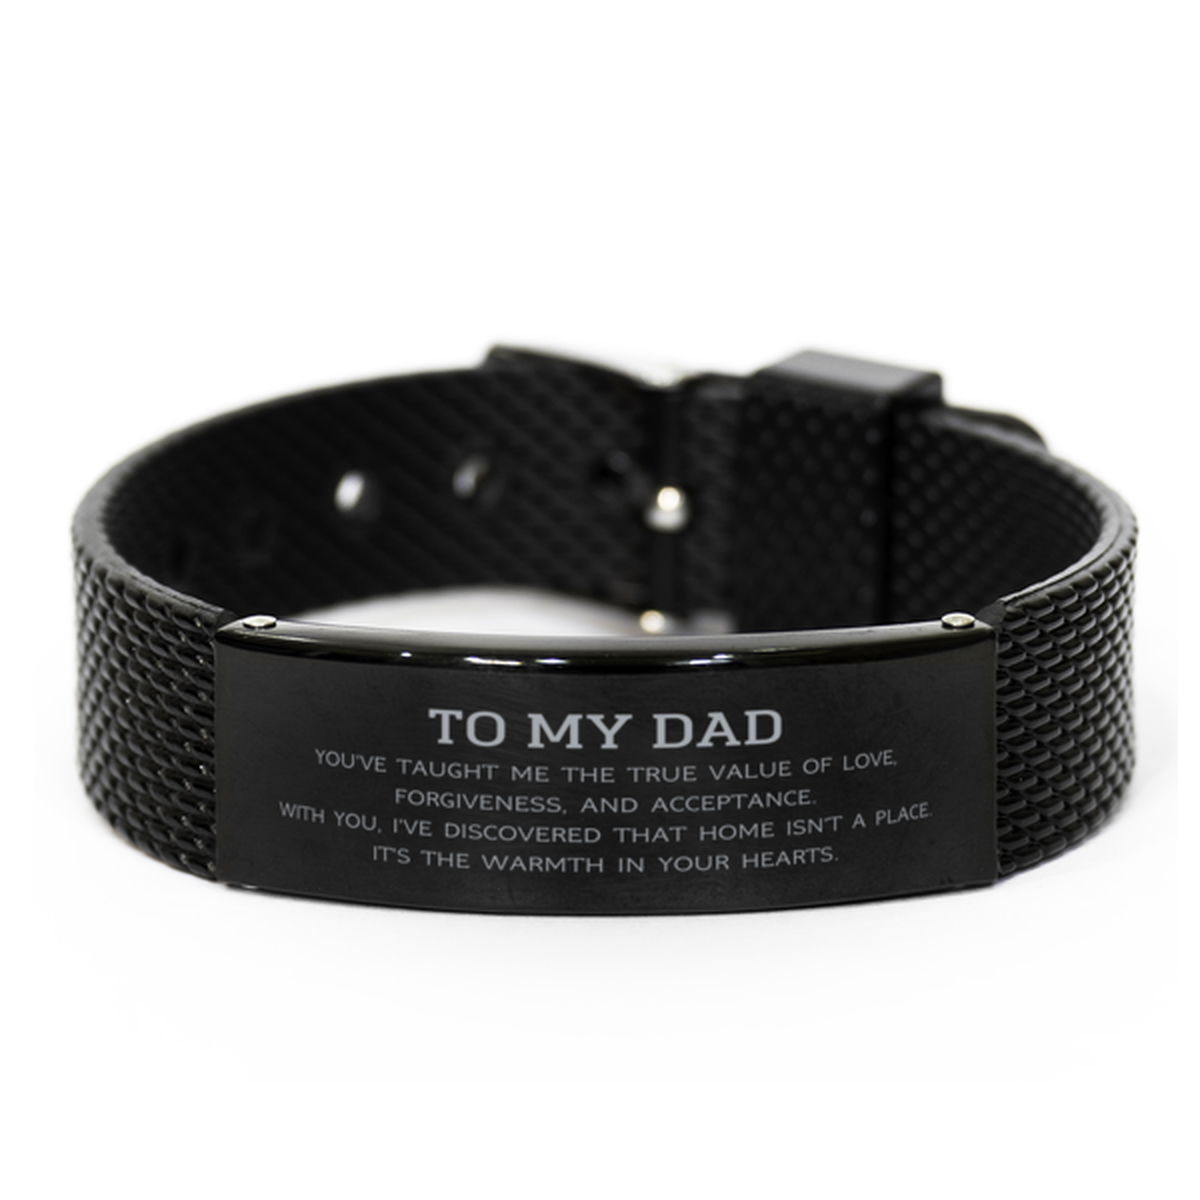 To My Dad Gifts, You've taught me the true value of love, Thank You Gifts For Dad, Birthday Black Shark Mesh Bracelet For Dad